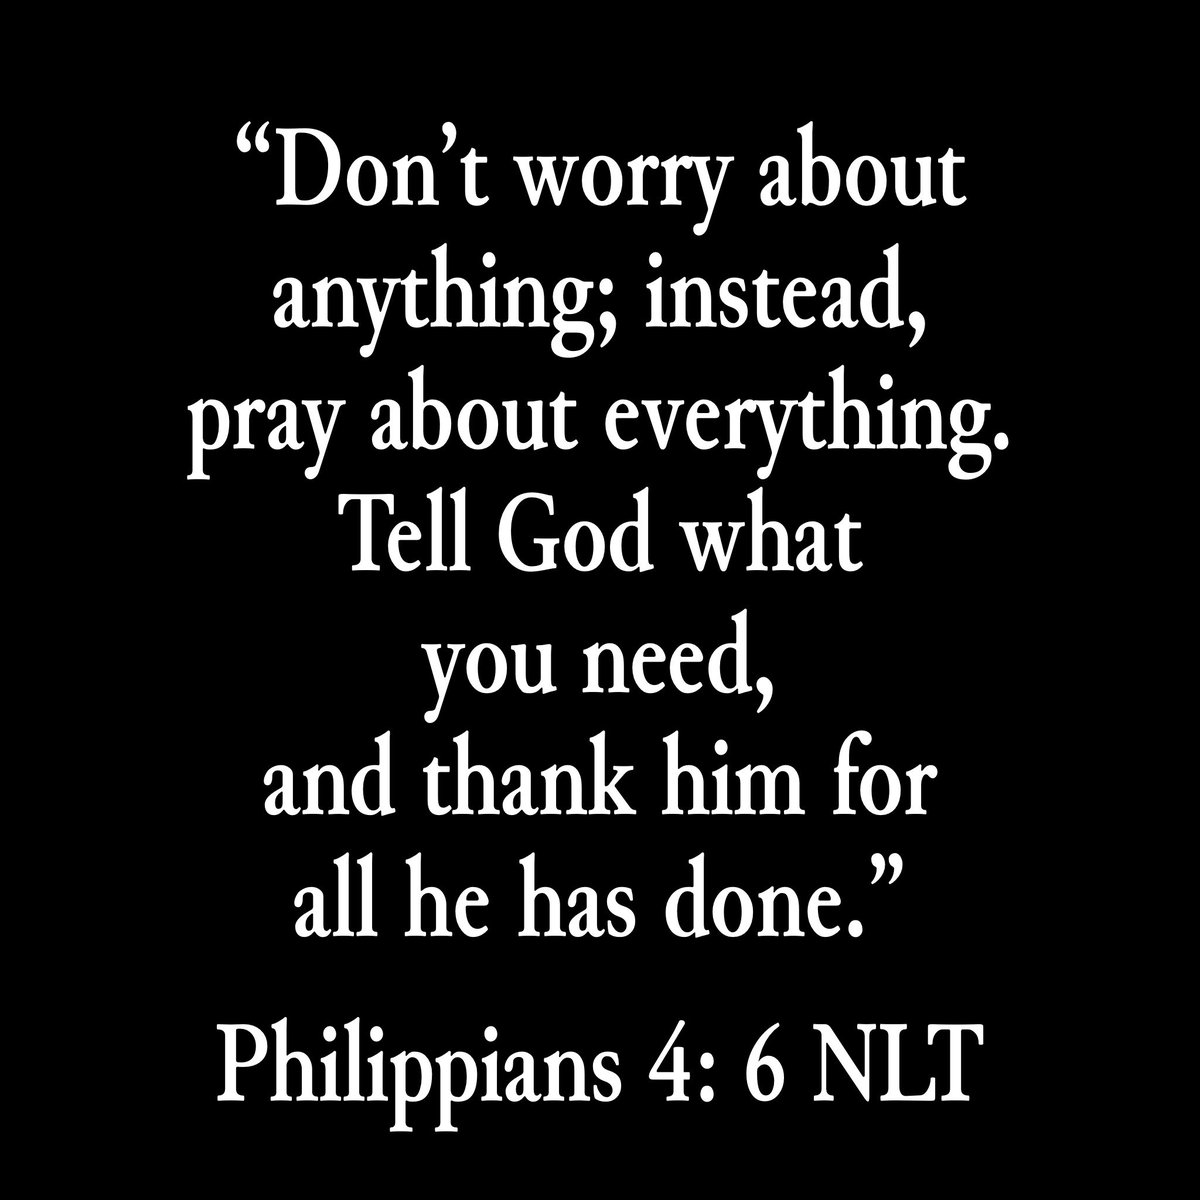 The Bible reminds us that the best cure for any and all our worries is prayer. When we take our worries to God and tell Him what we need, the worry doesn’t feel as heavy.
#LetGoAndLetGod